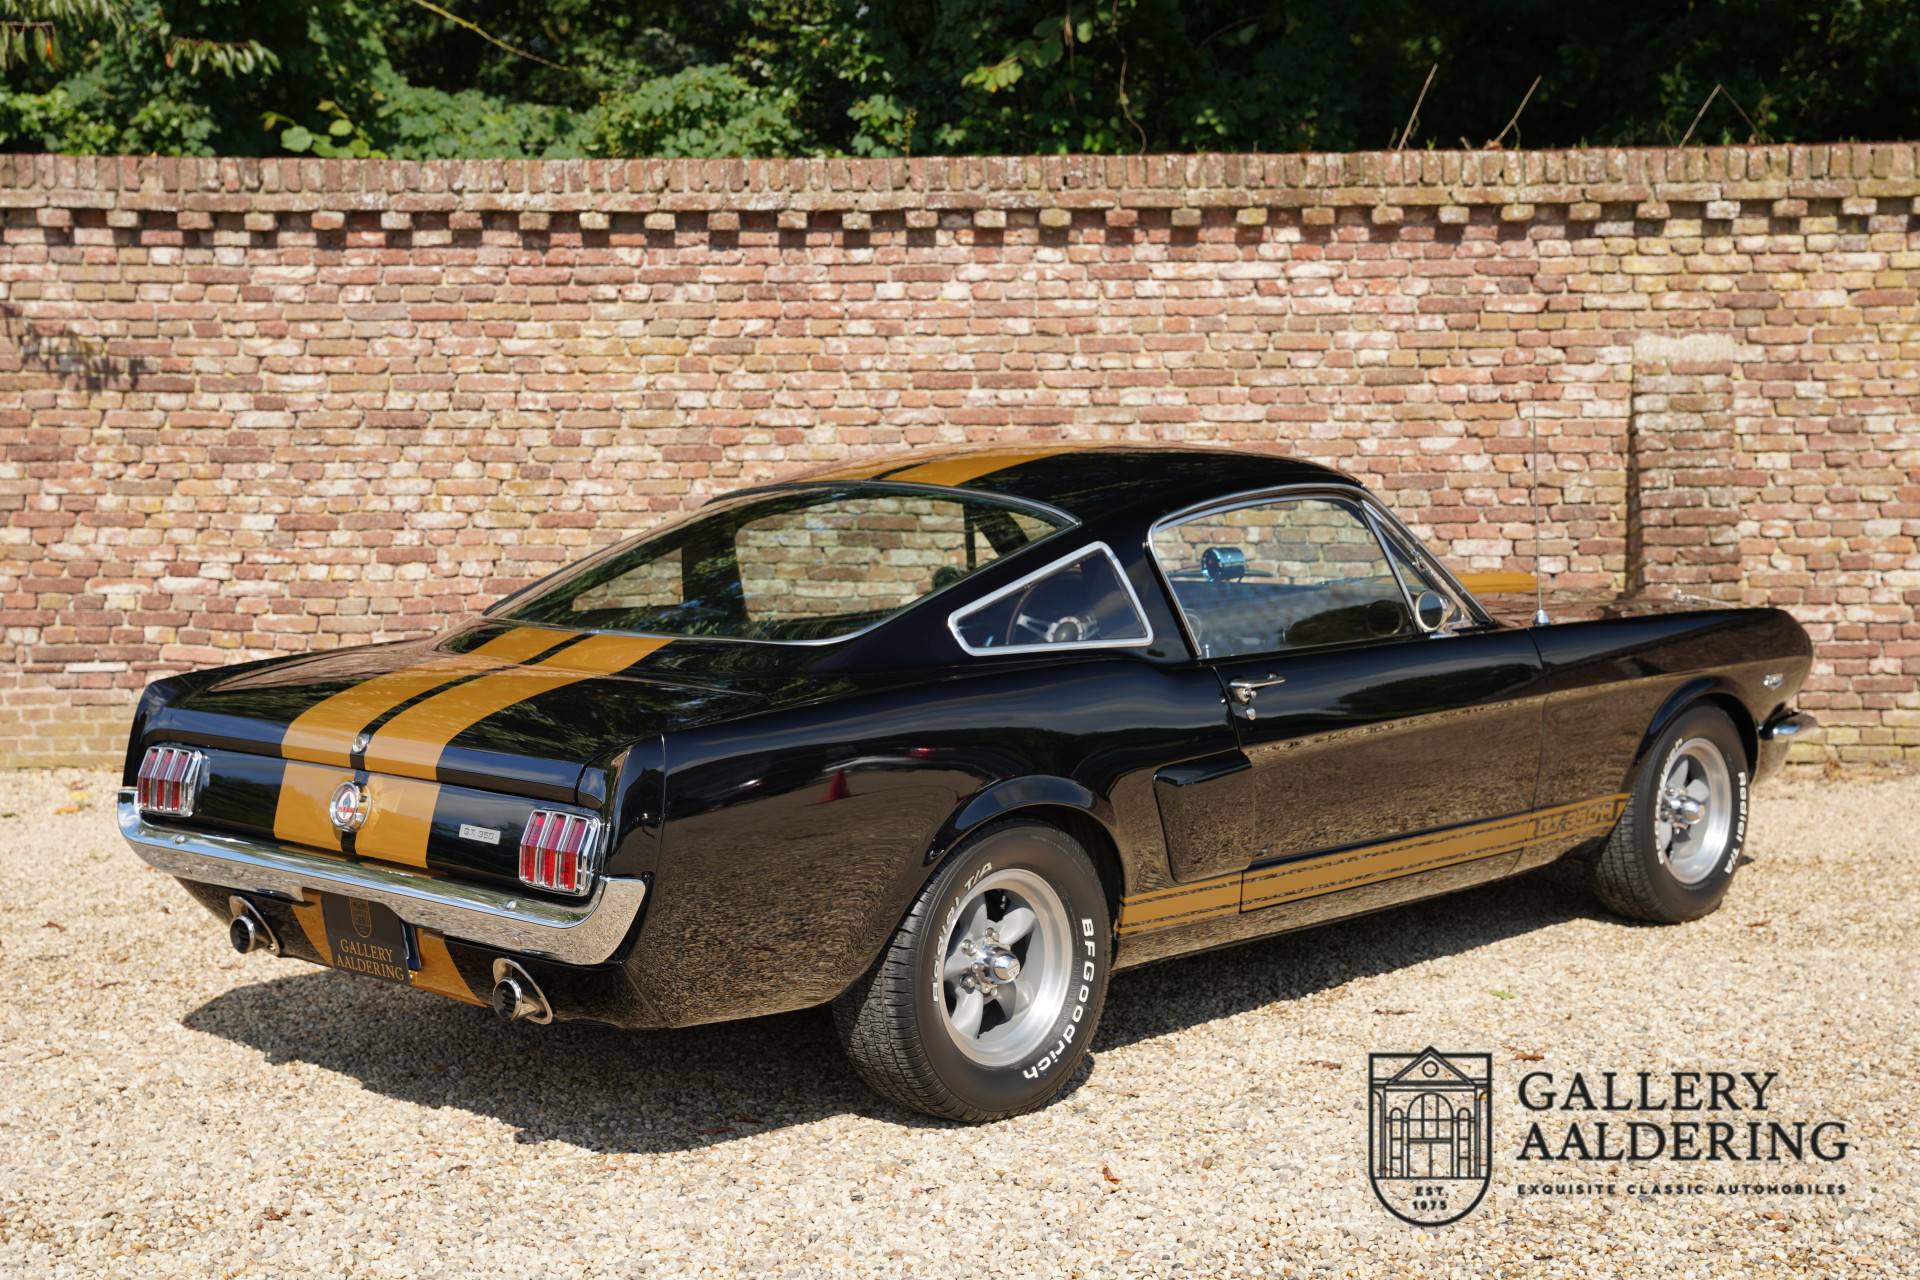 Ford Mustang Shelby GT500 Fastback 1968 à vendre - Gallery Aaldering